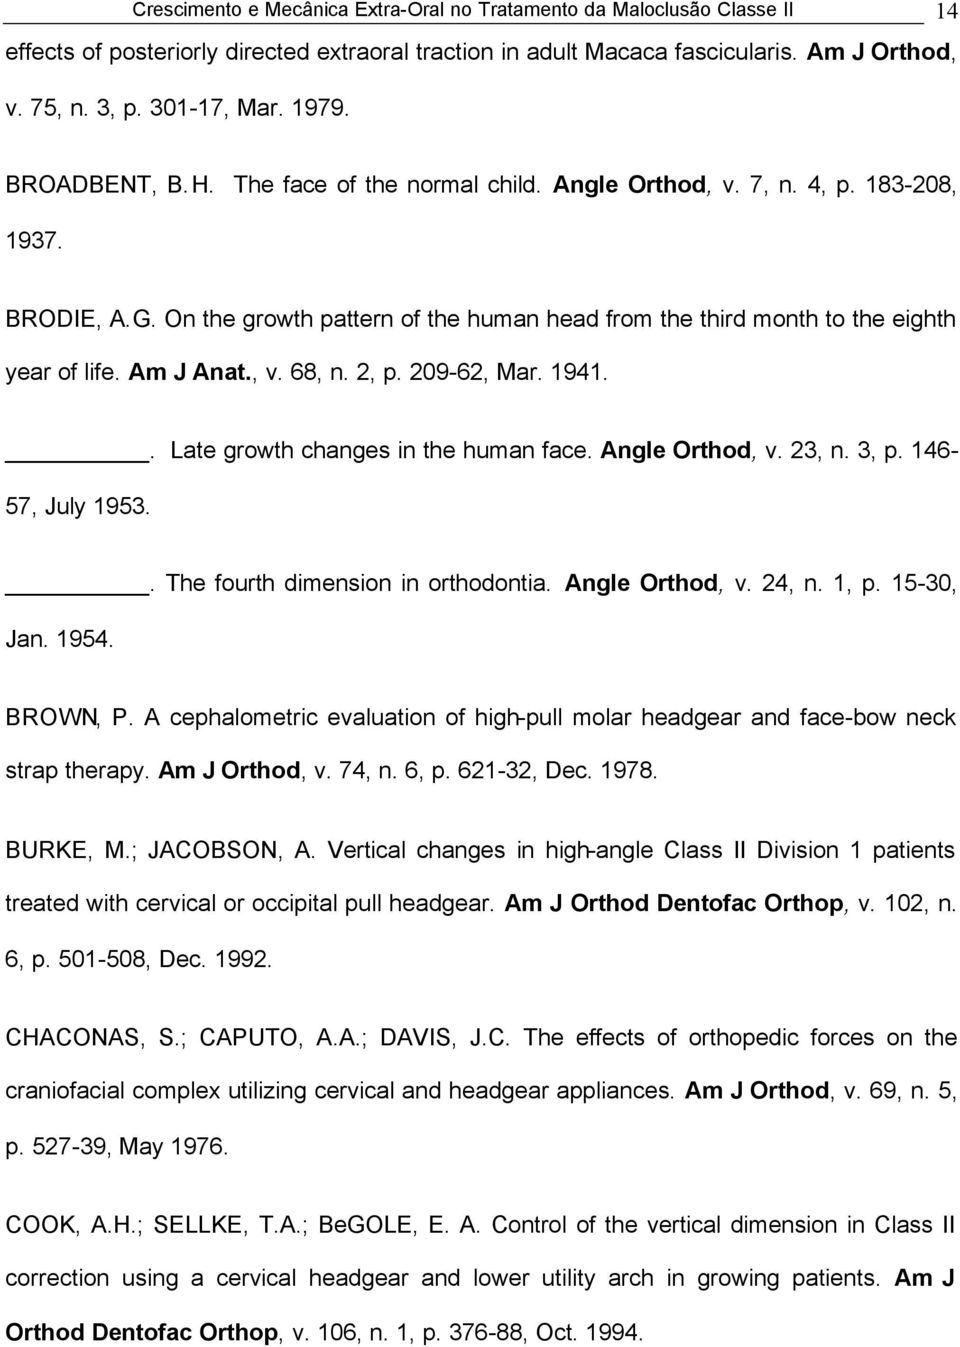 Am J Anat., v. 68, n. 2, p. 209-62, Mar. 1941.. Late growth changes in the human face. Angle Orthod, v. 23, n. 3, p. 146-57, July 1953.. The fourth dimension in orthodontia. Angle Orthod, v. 24, n.